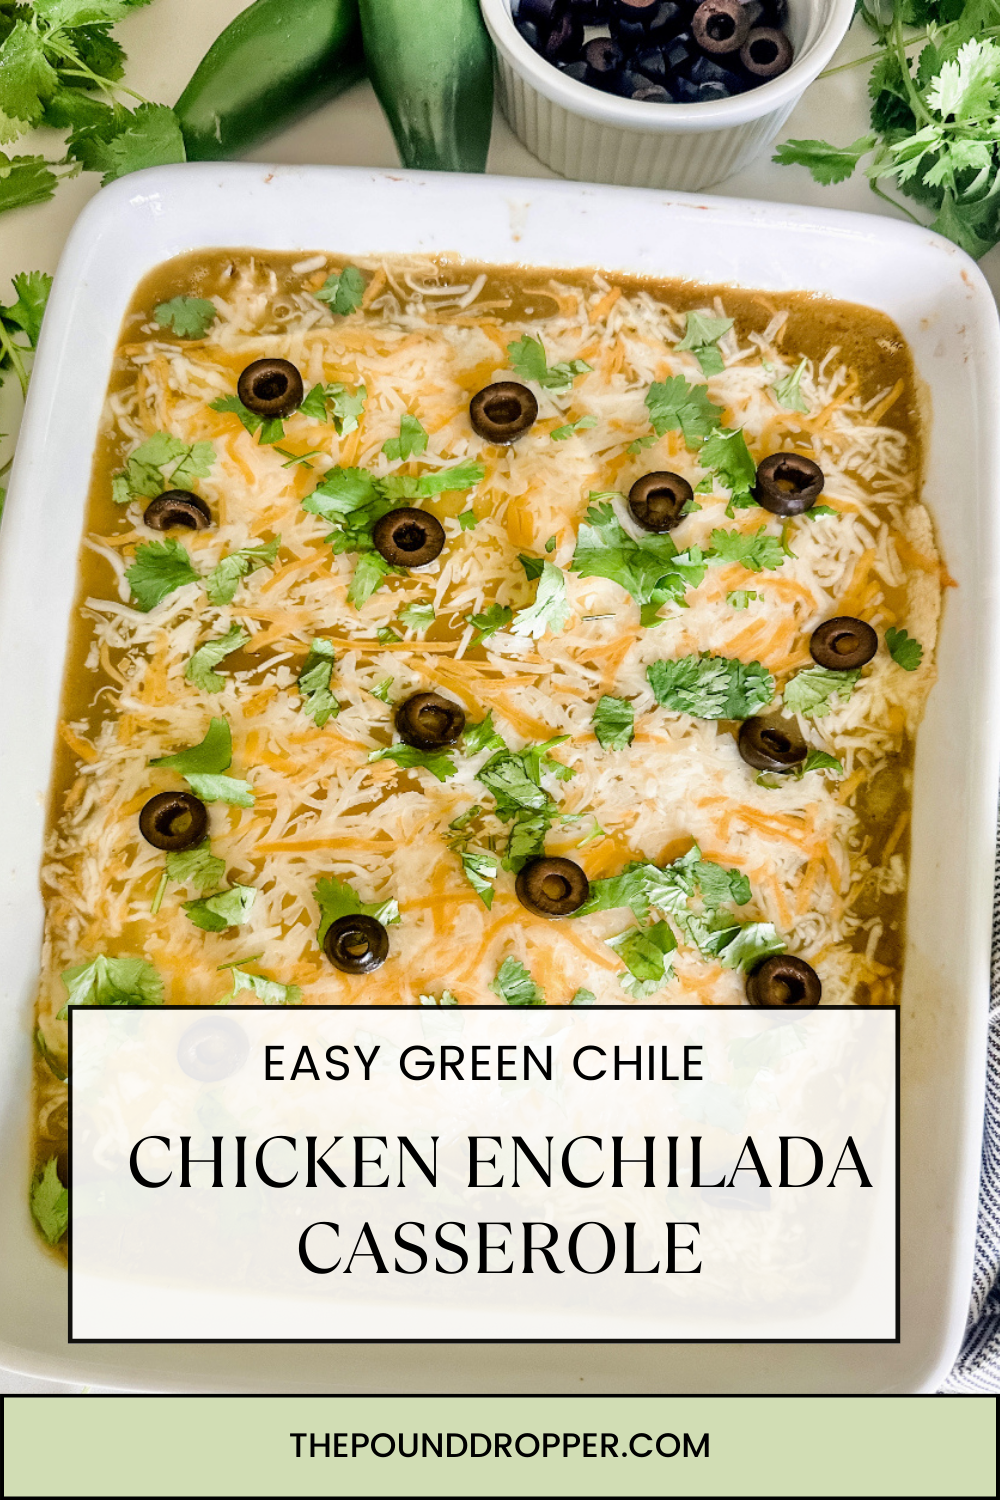 This Easy Green Chile Chicken Enchilada Casserole is an easy, one dish dinner that’s a family favorite! Made with pantry staples- it’s filling, and delicious! via @pounddropper